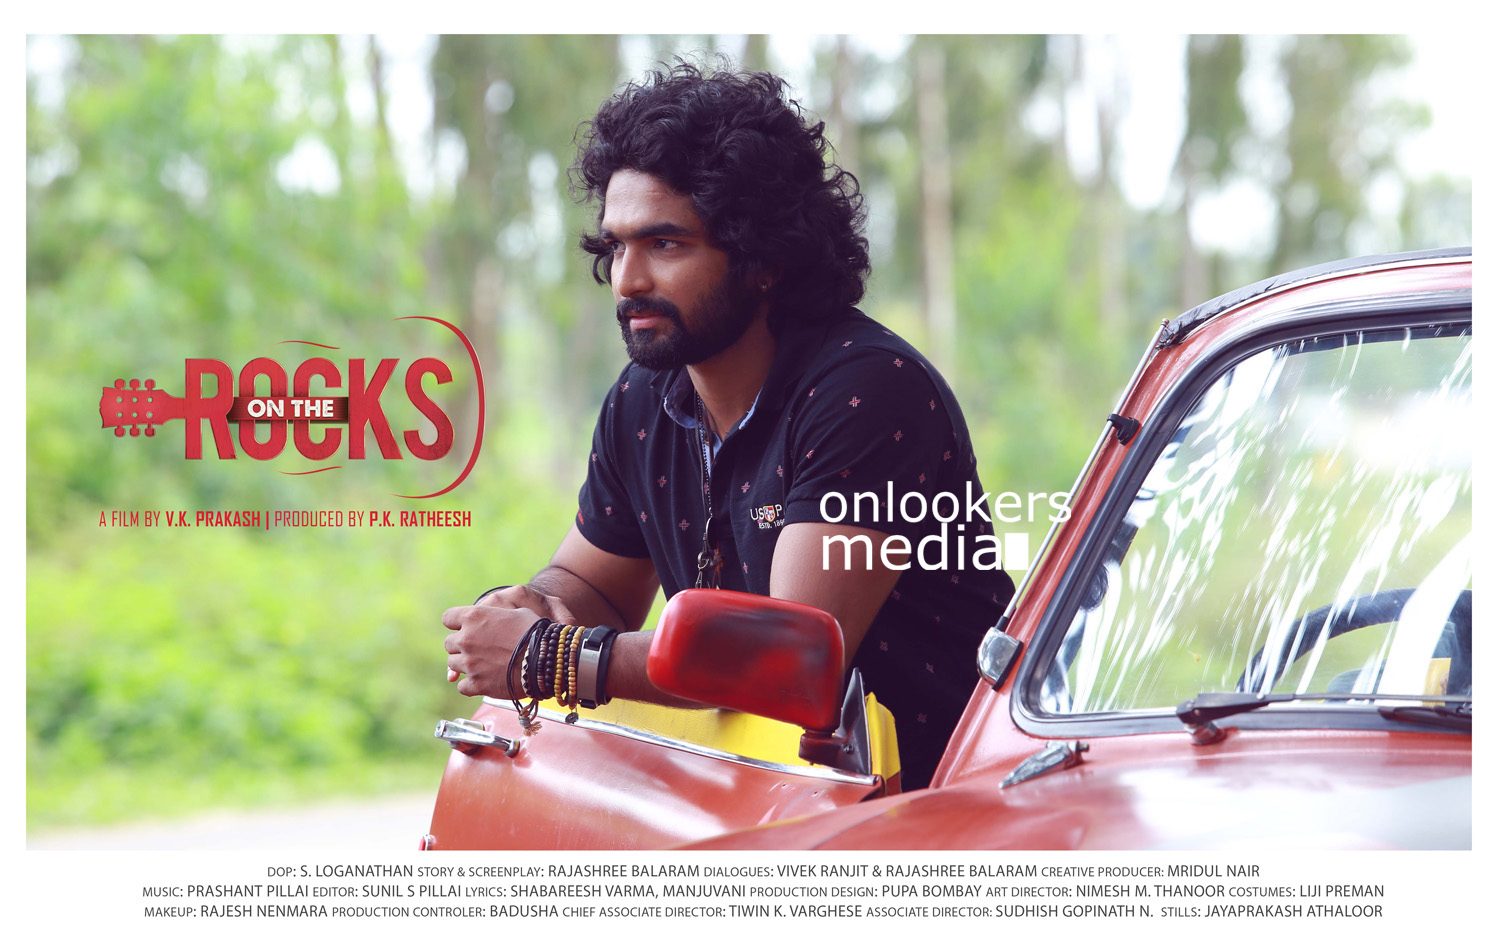 https://onlookersmedia.in/wp-content/uploads/2015/10/Sidharth-Menon-in-On-The-Rocks-Stills-Posters-10.jpg